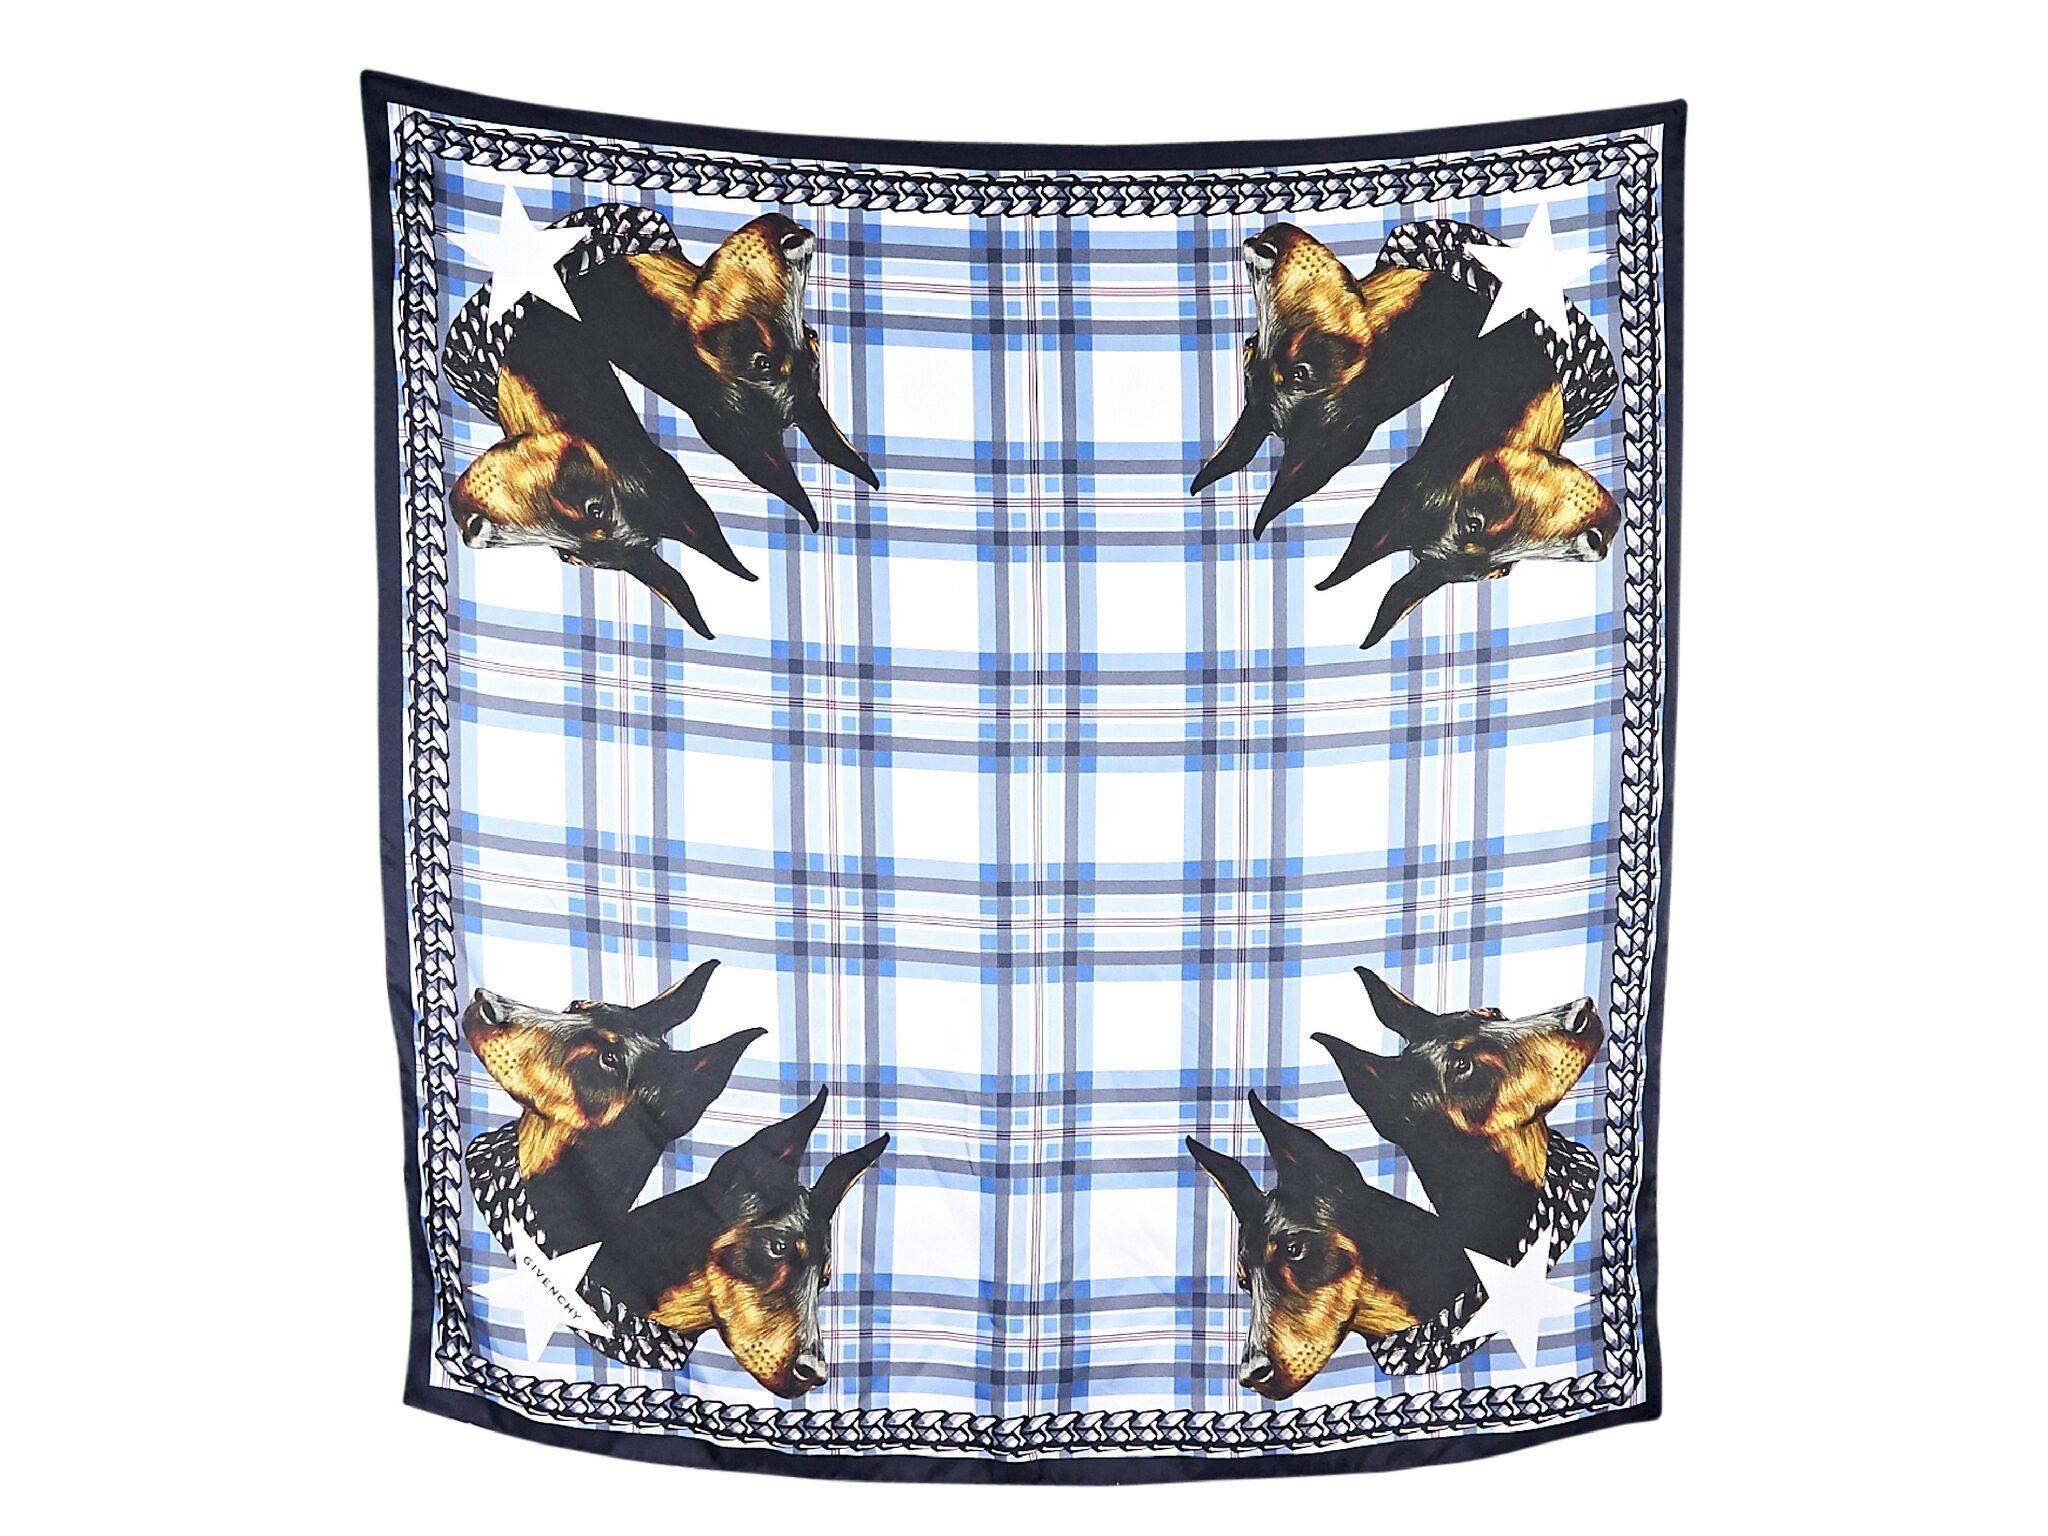 Product details:  Multicolor plaid and Doberman printed silk scarf by Givenchy.  33